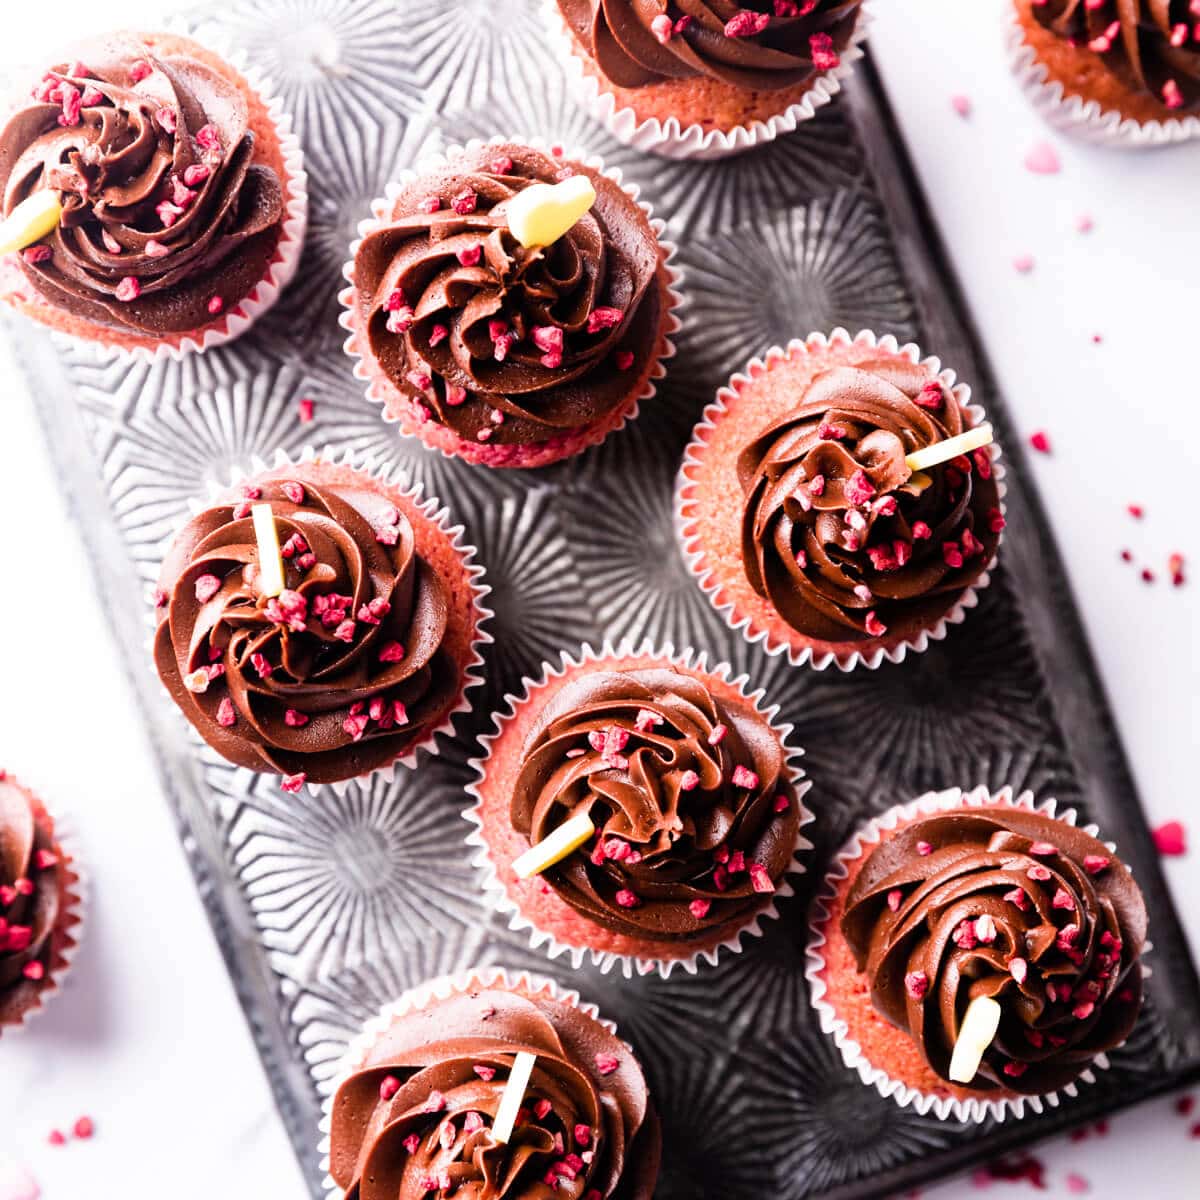 raspberry cupcakes topped with swirls of chocolate buttercream.